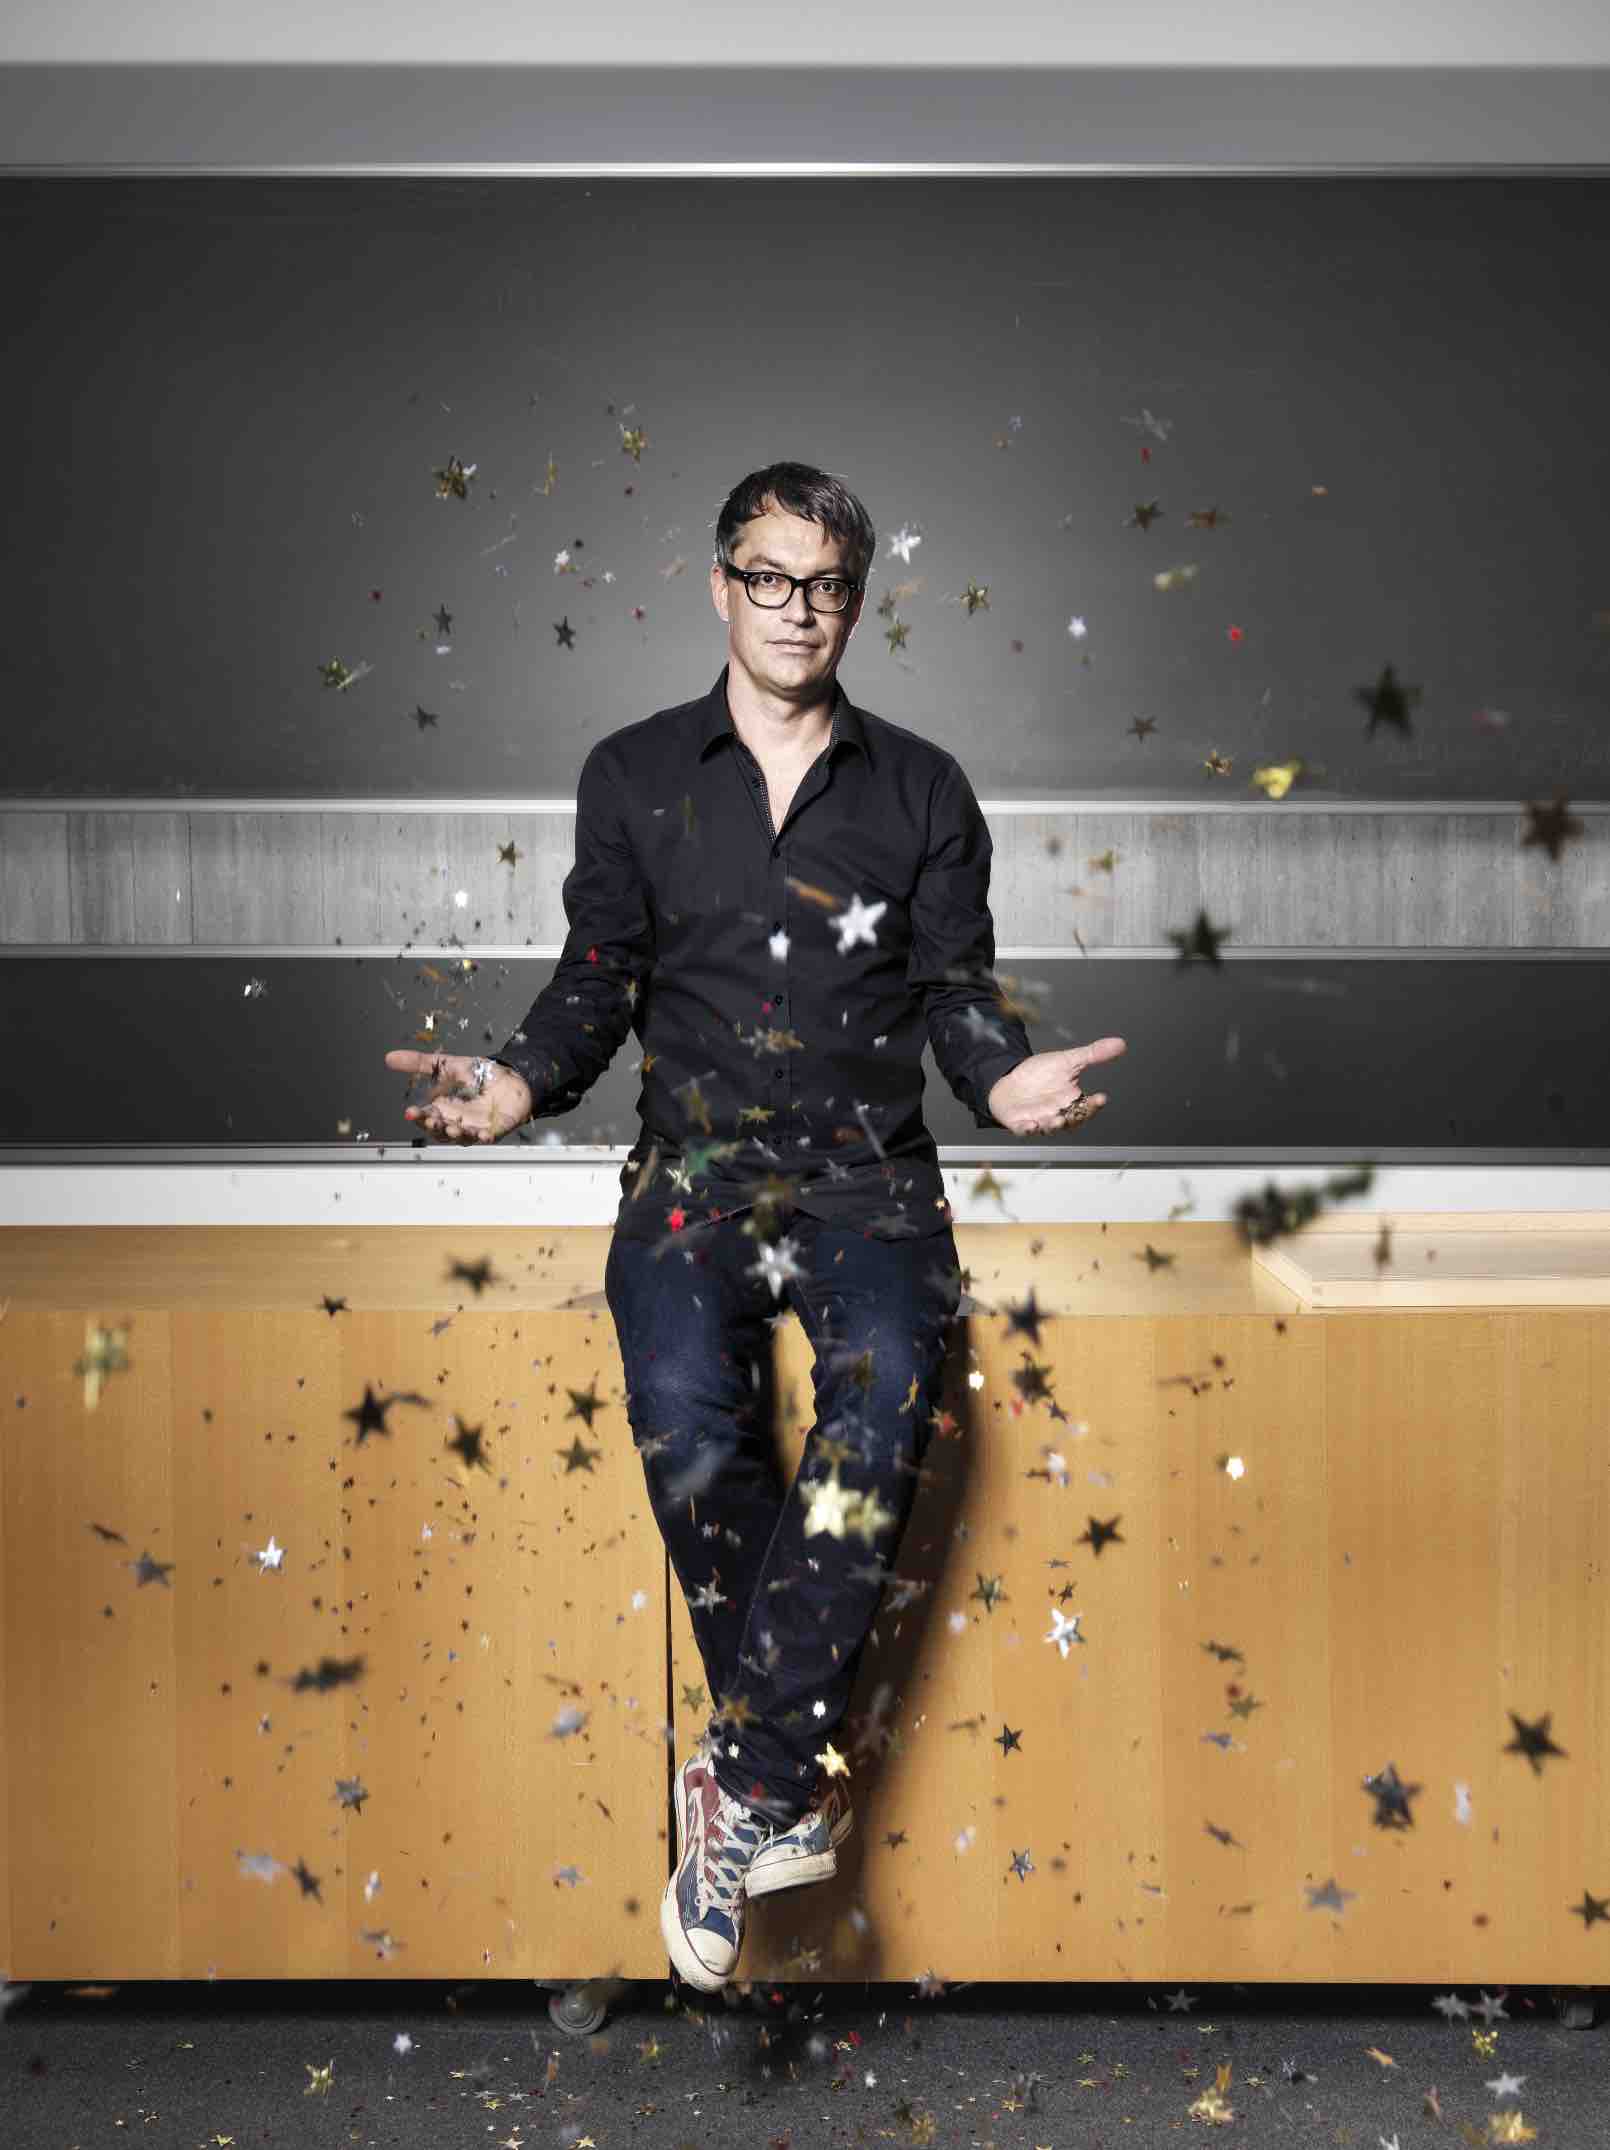 A scientist (Ben Moore) sits in front of the lecture room surrounded by star-shaped confetti